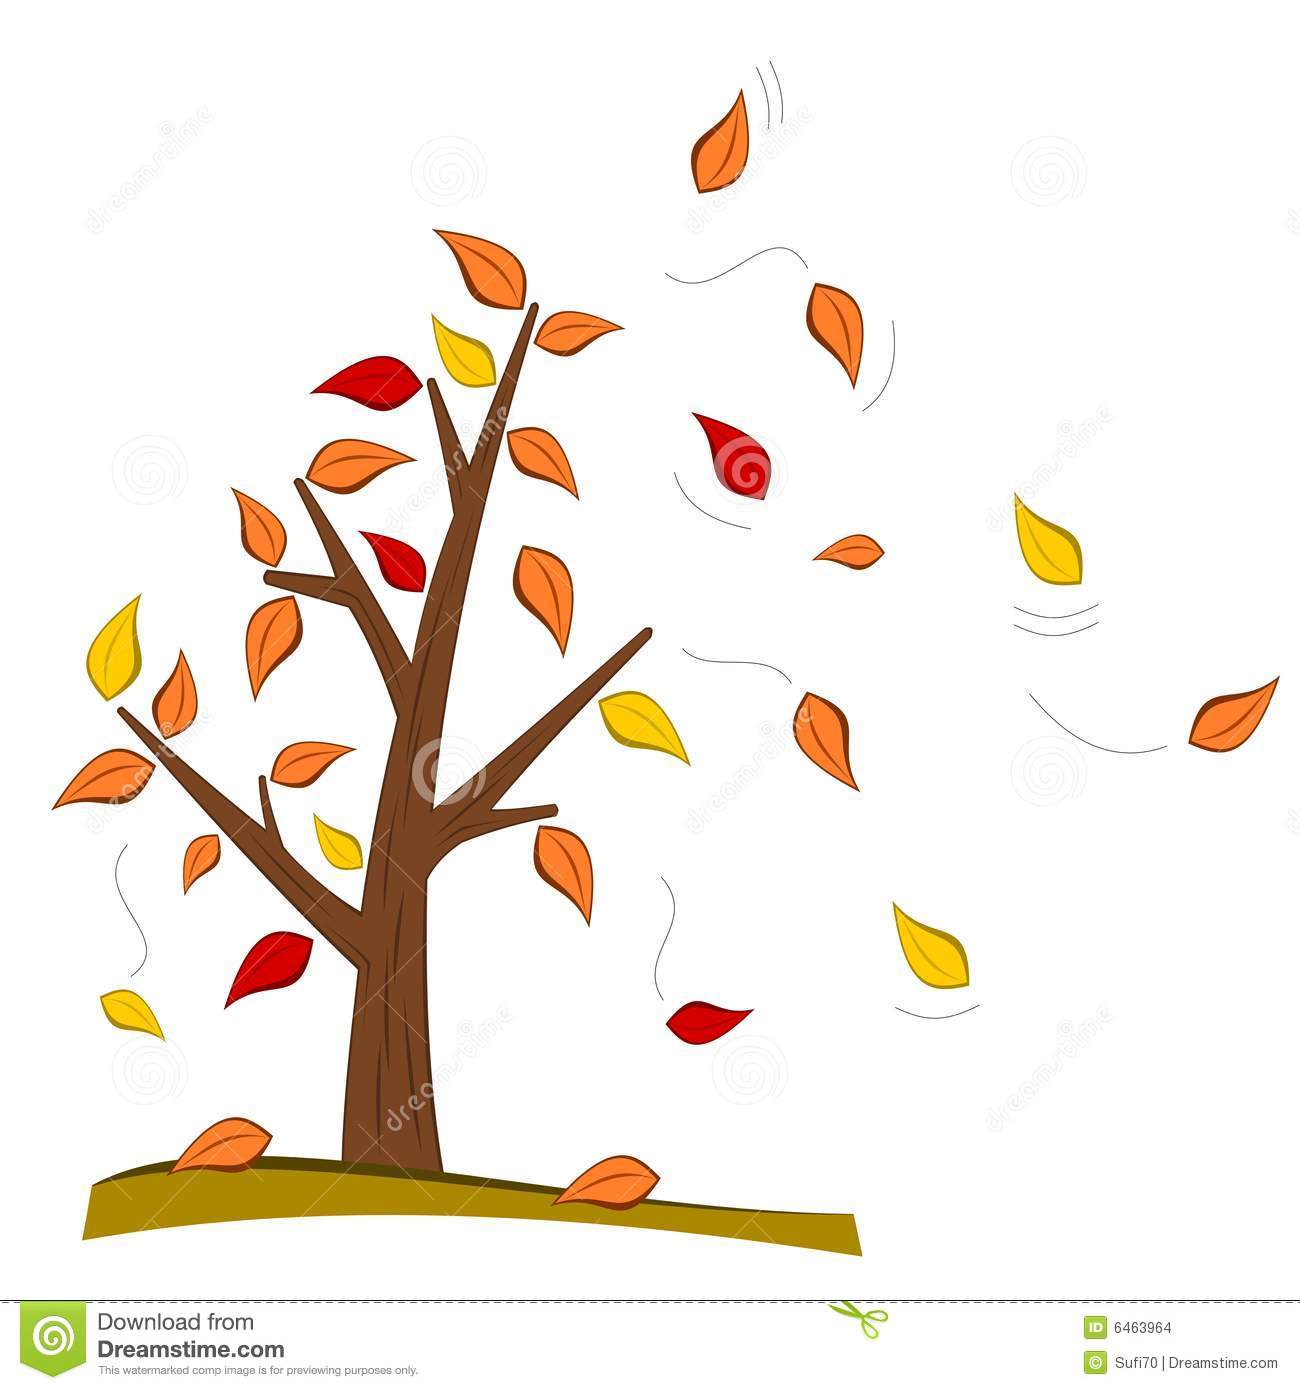 Animated Fall Tree Clip Art Images Tree In The Wind With Falling